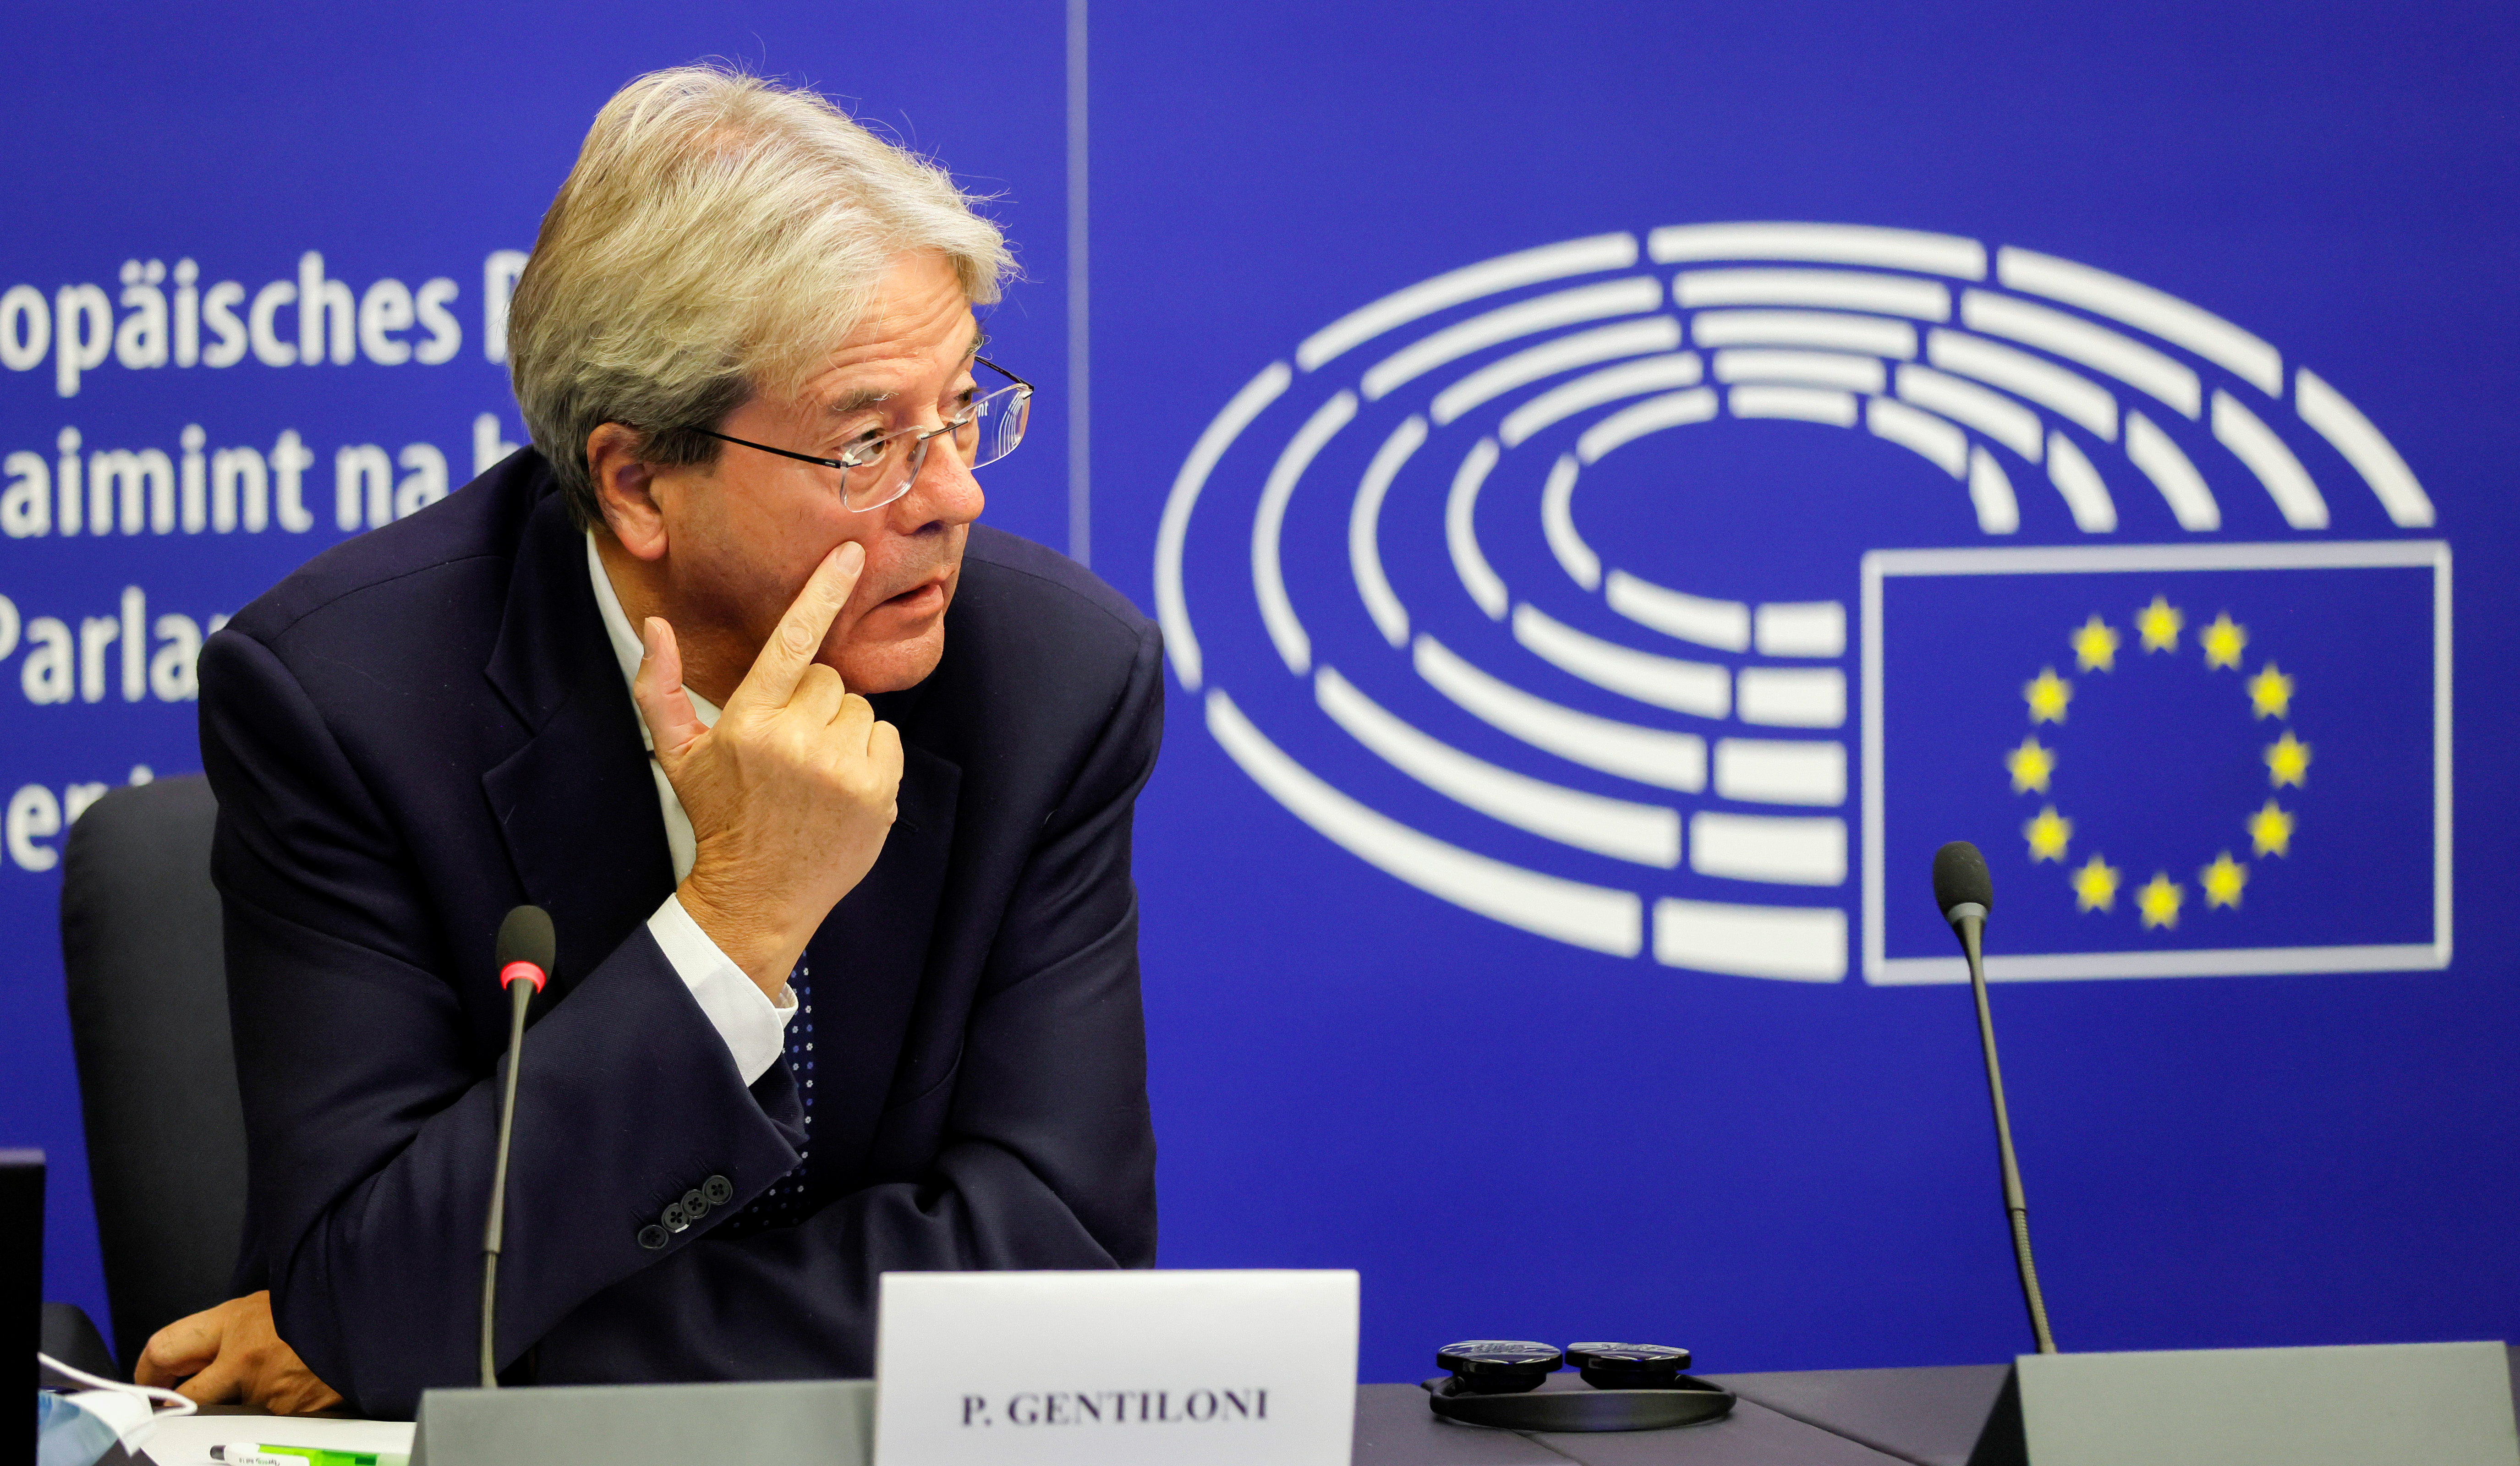 European Commissioner for Economy Paolo Gentiloni attends a press conference of Read-out of the College meeting during a debate on Poland's challenge to the supremacy of EU laws at the European Parliament in Strasbourg, France, October 19, 2021. Ronald Wittek/Pool via REUTERS